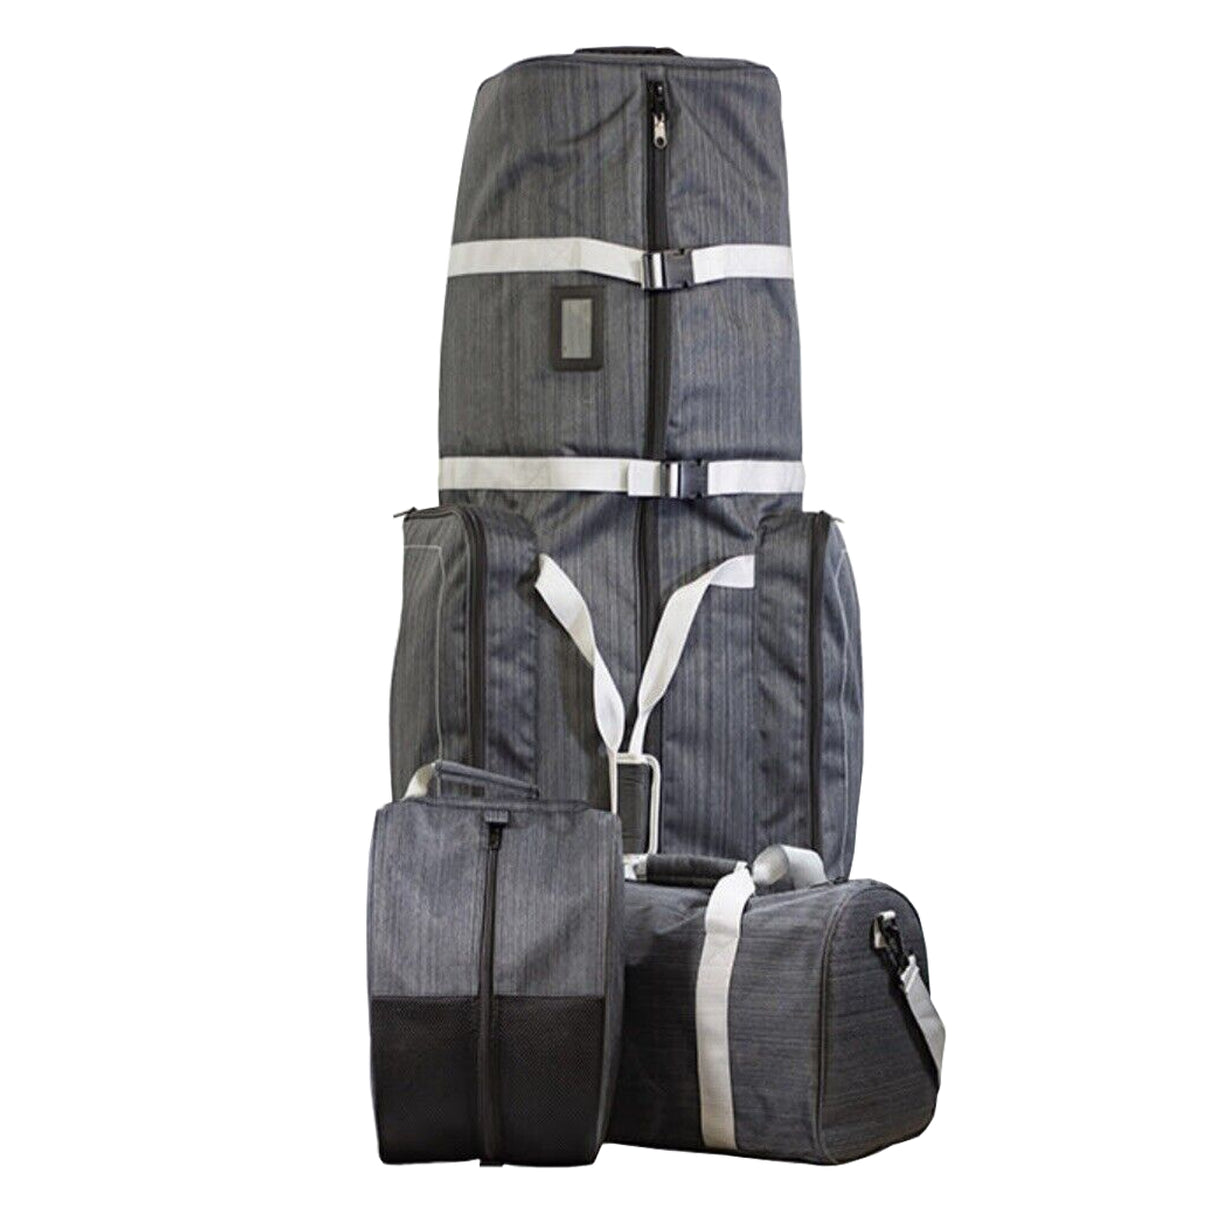 Travel Guardian 3-Piece Deluxe Padded Wheeled Golf Bag Travel Cover Set